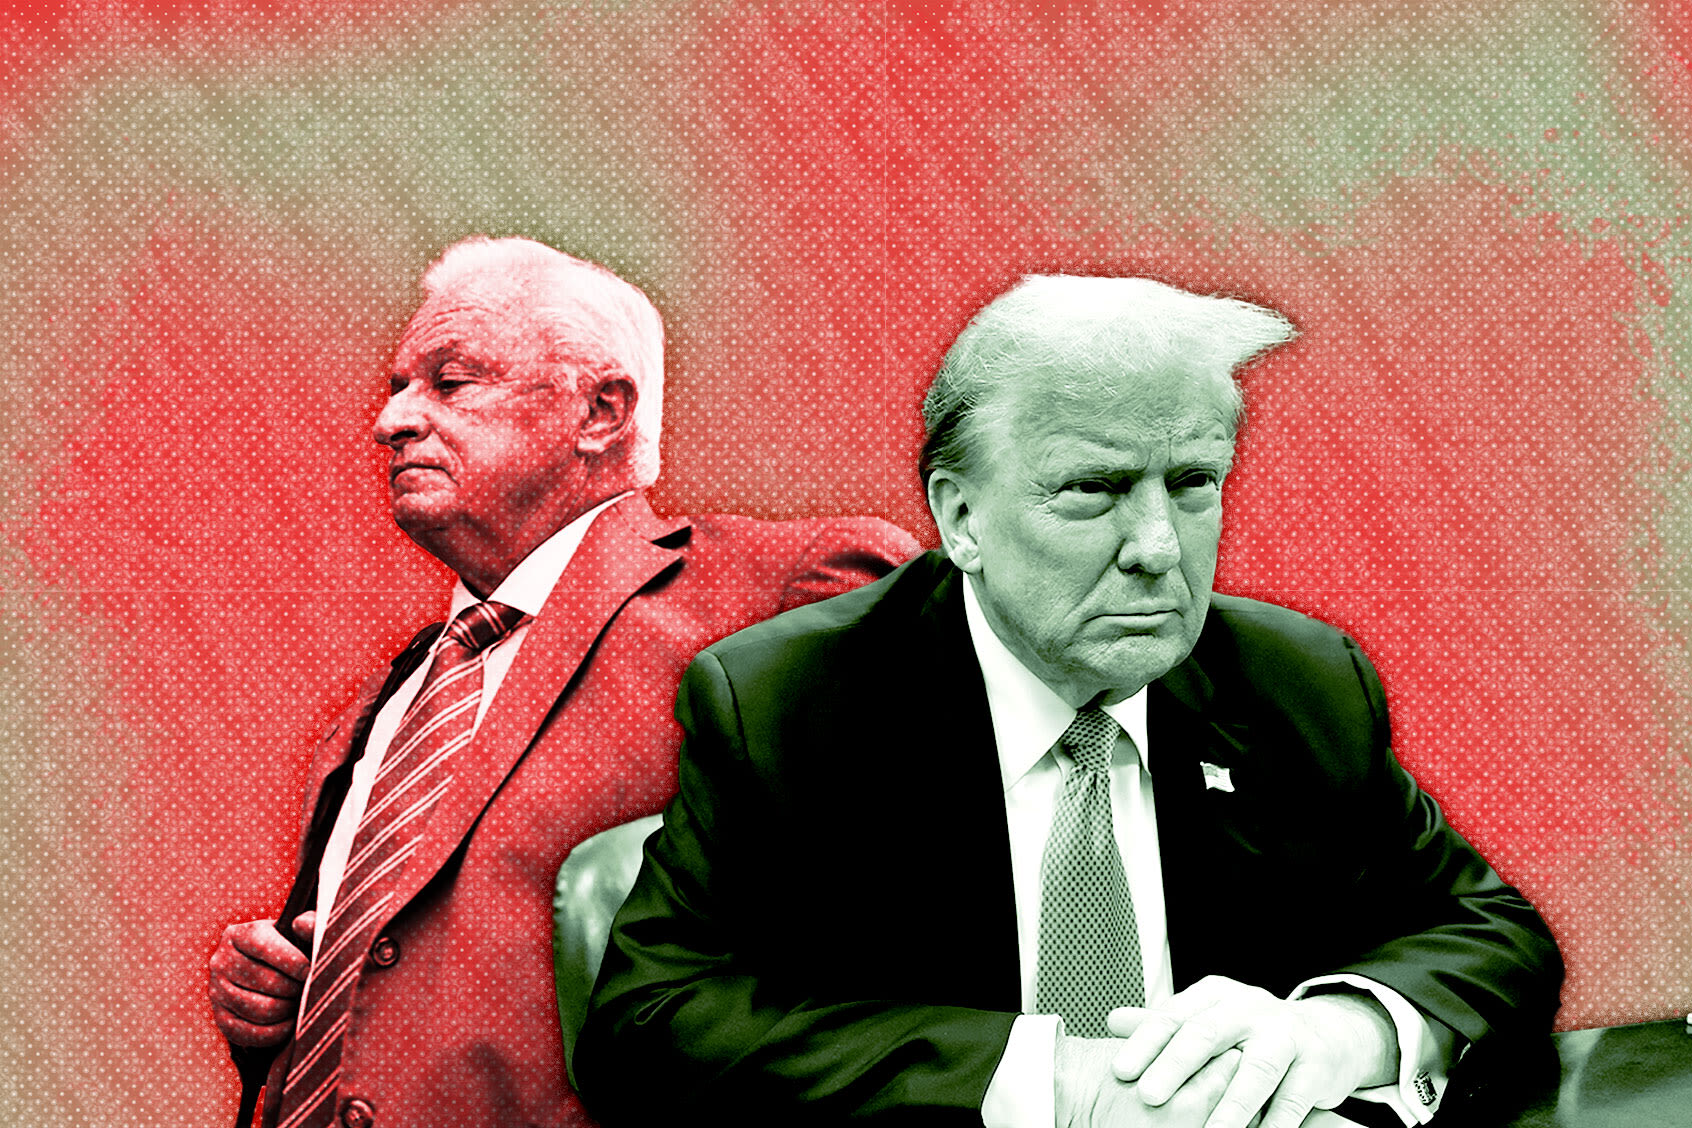 Along came Robert Costello: Trump's crime boss maneuvering blows up in court